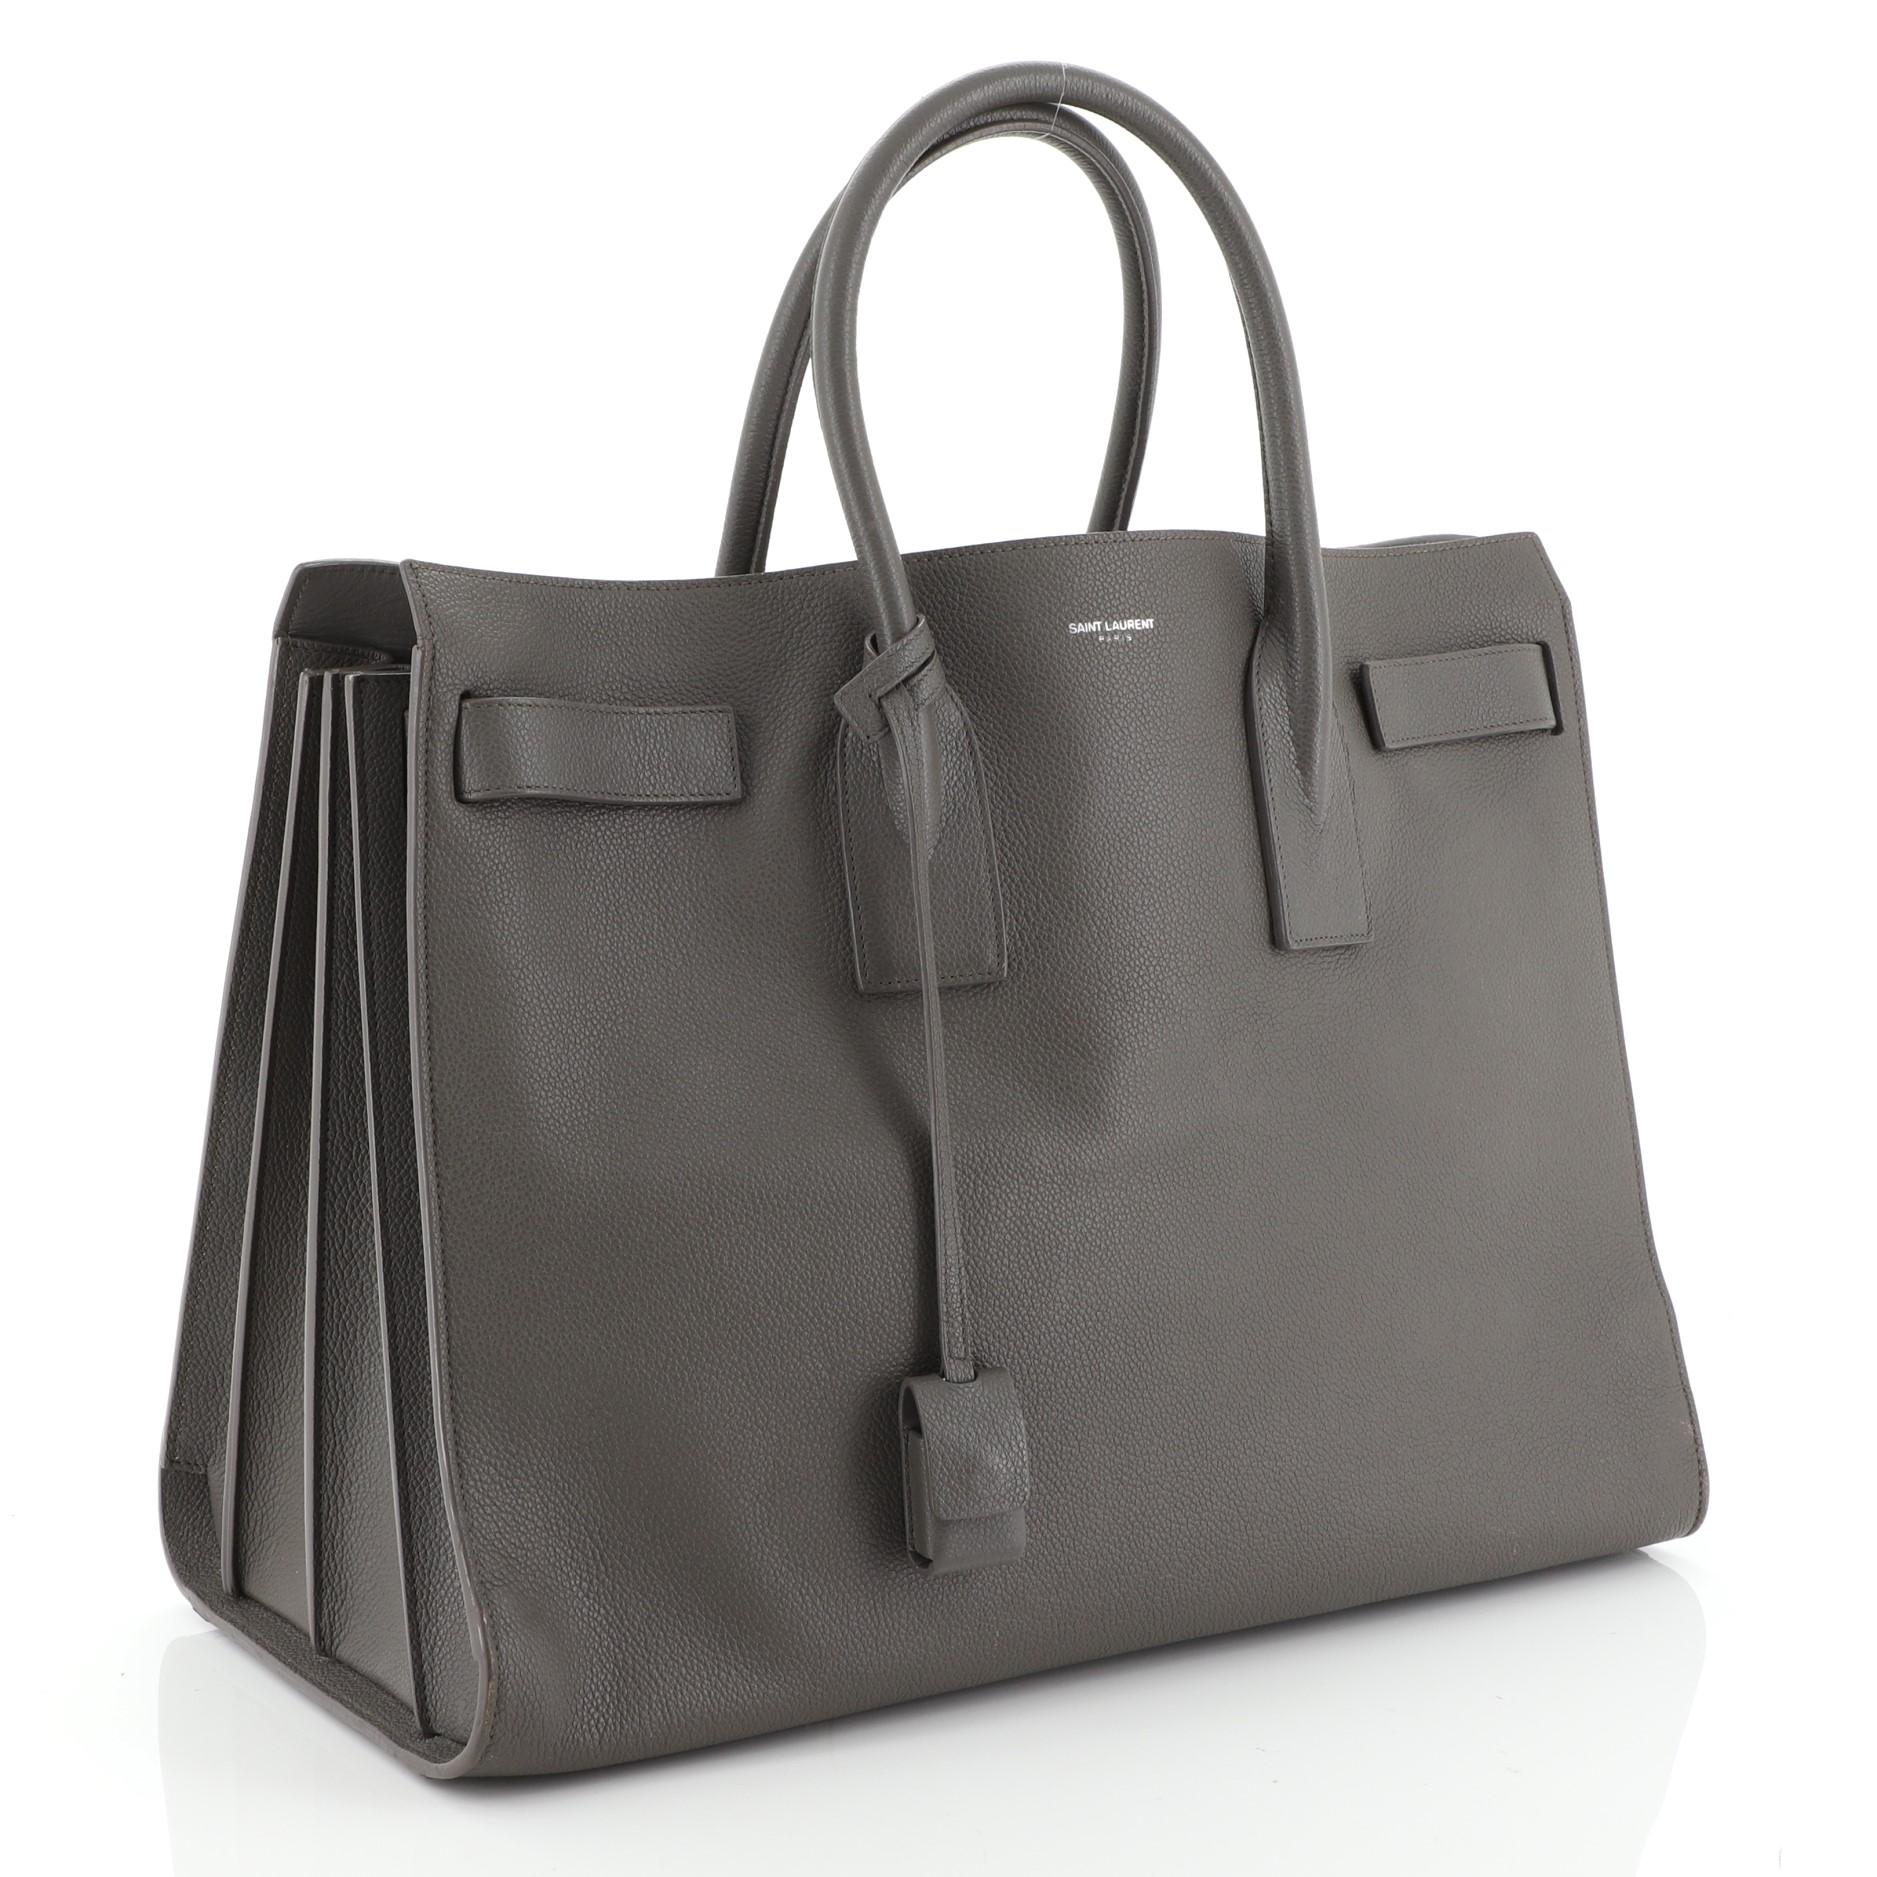 This Saint Laurent Sac de Jour Carryall NM Bag Leather Large, crafted from gray leather, features dual rolled leather handles, protective base studs, and silver-tone hardware. Its leather tabs open to a gray leather interior divided into two